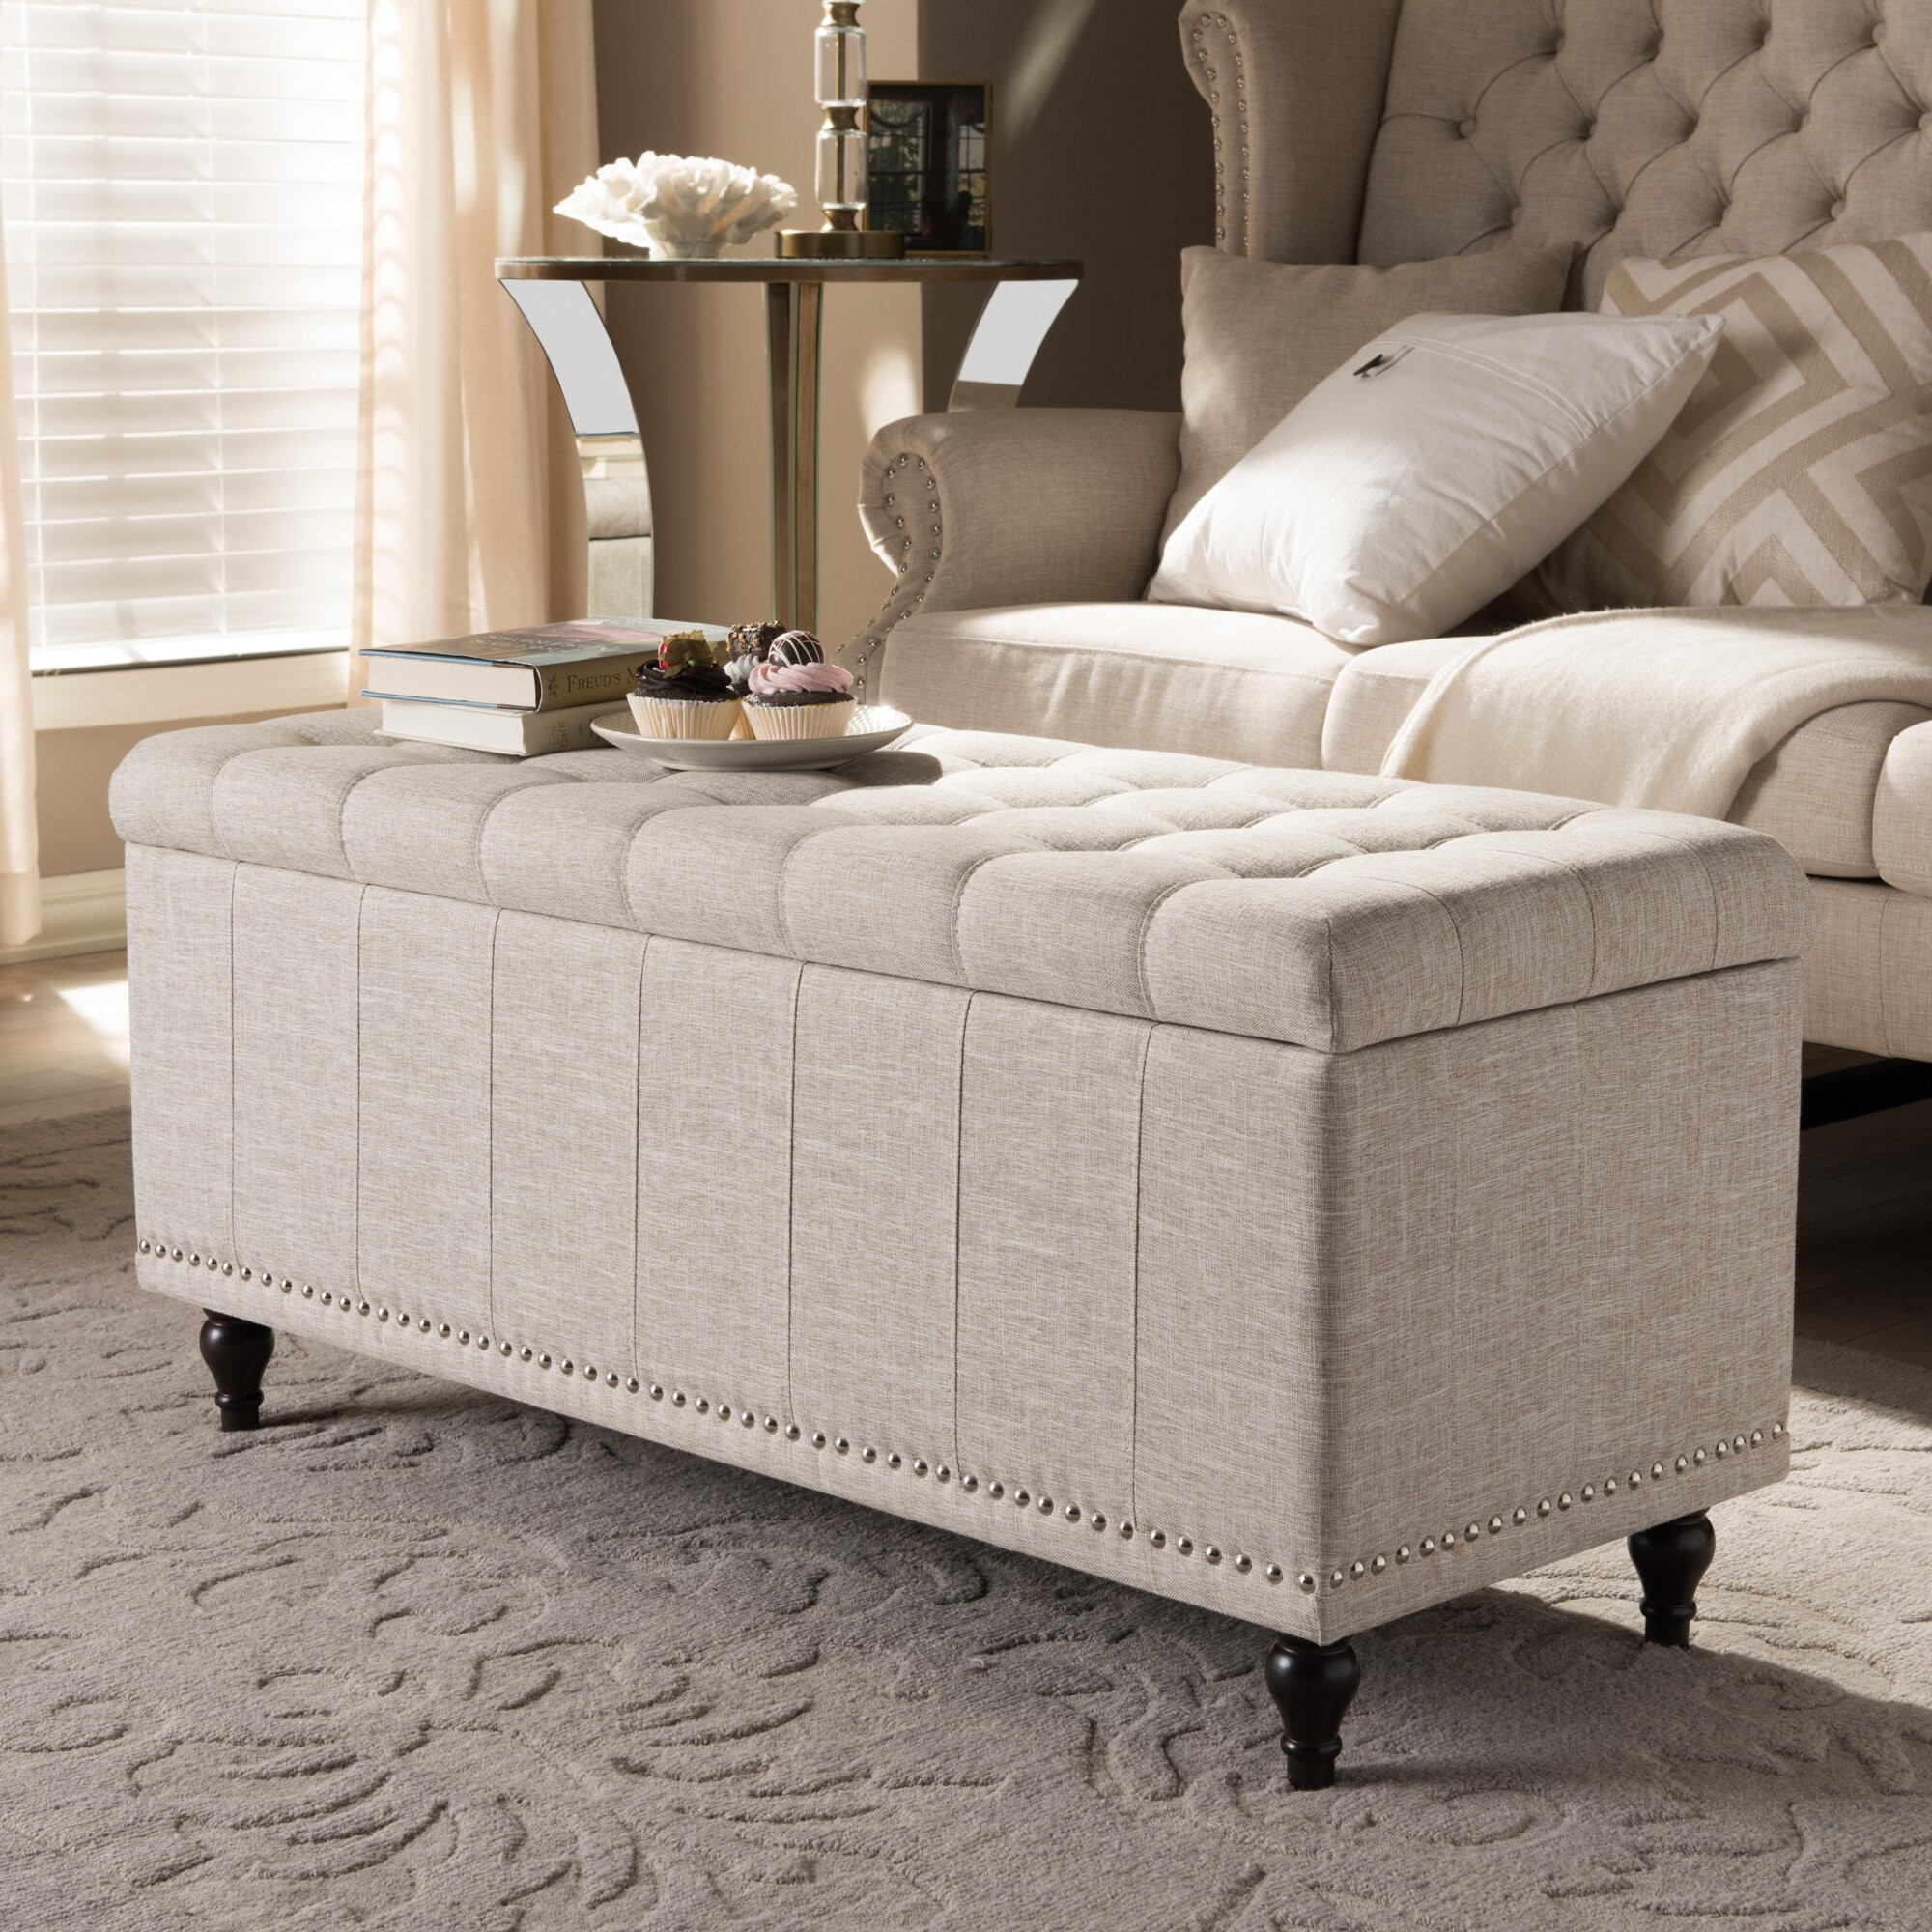 Bedroom Bench With Storage
 Wholesale Interiors Baxton Studio Luca Upholstered Storage